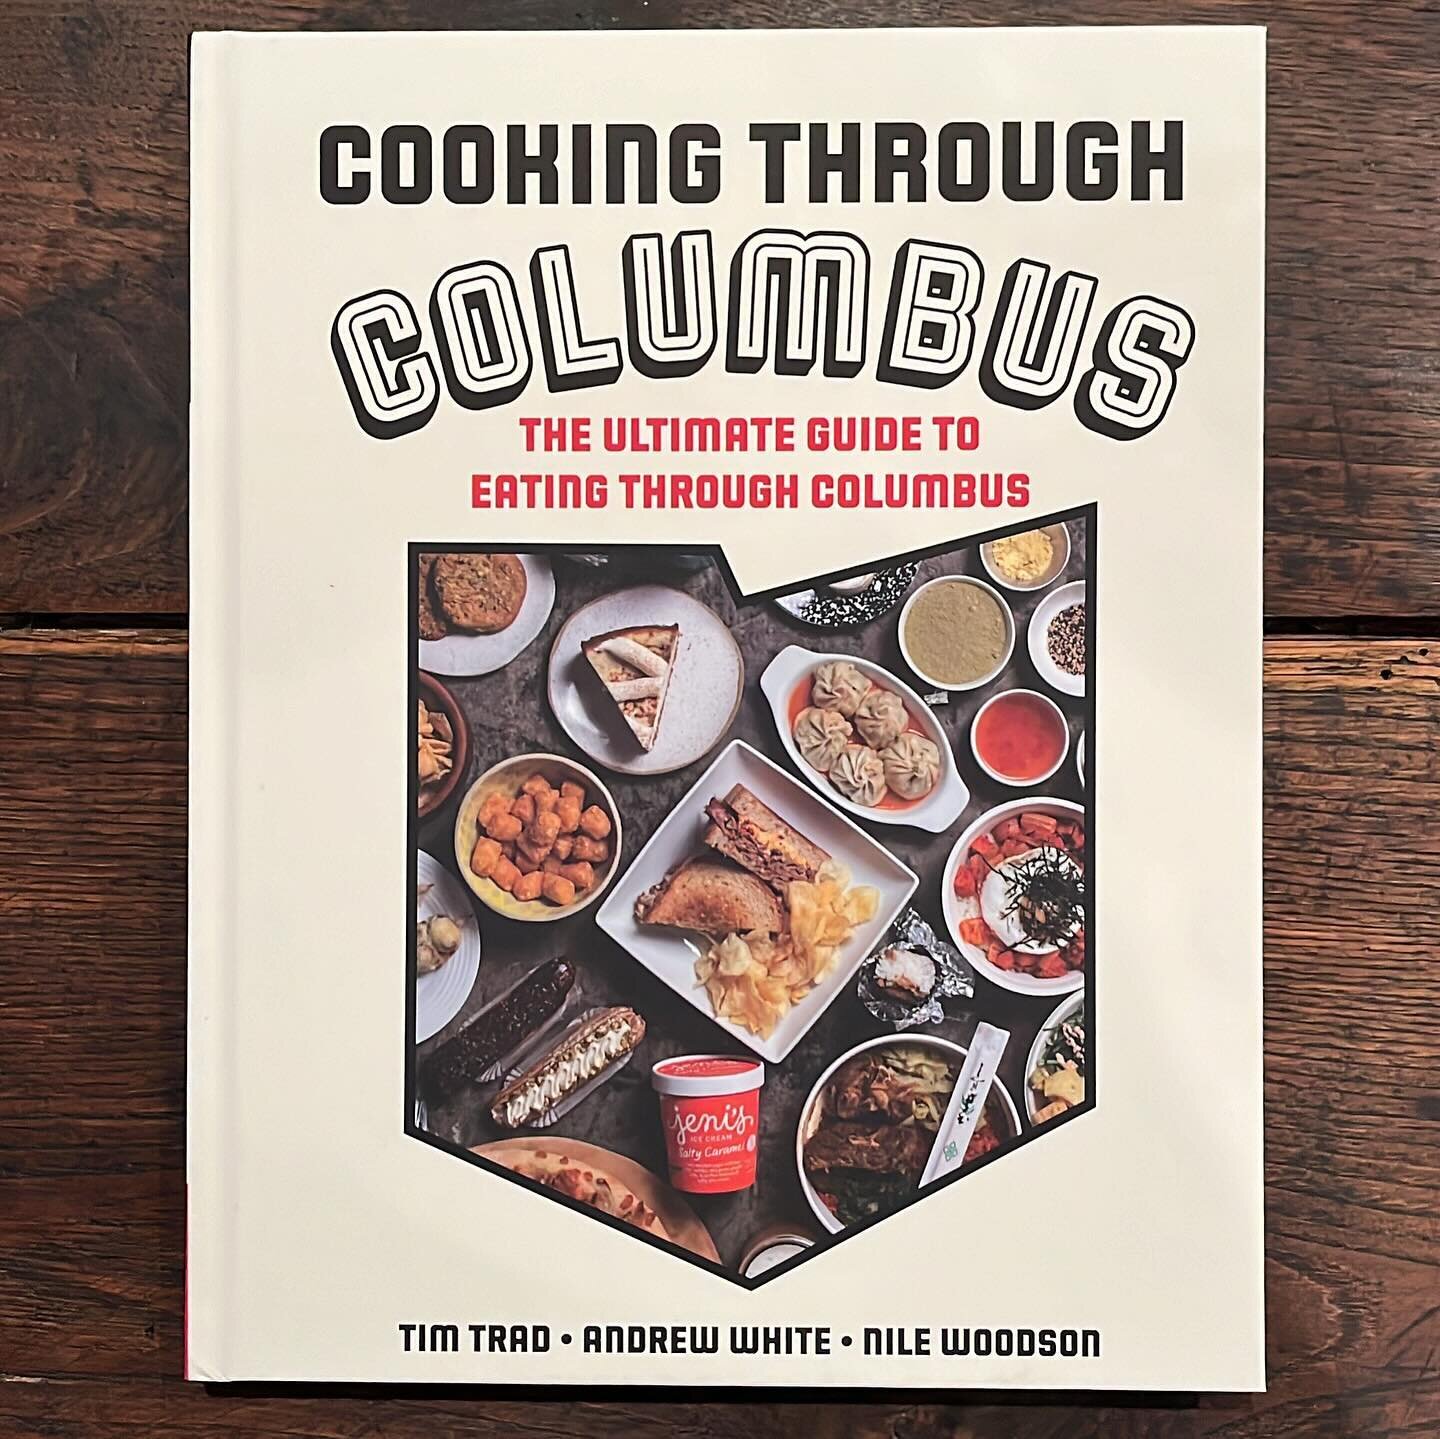 We are in a COOKBOOK!

With the holidays approaching, be sure to order a couple copies of Cooking Through Columbus to share with family/friends!  Our Emmett&rsquo;s Bowl (created by Emmett&rsquo;s Head Chef - @chefjonhauman ) is featured!  Follow the